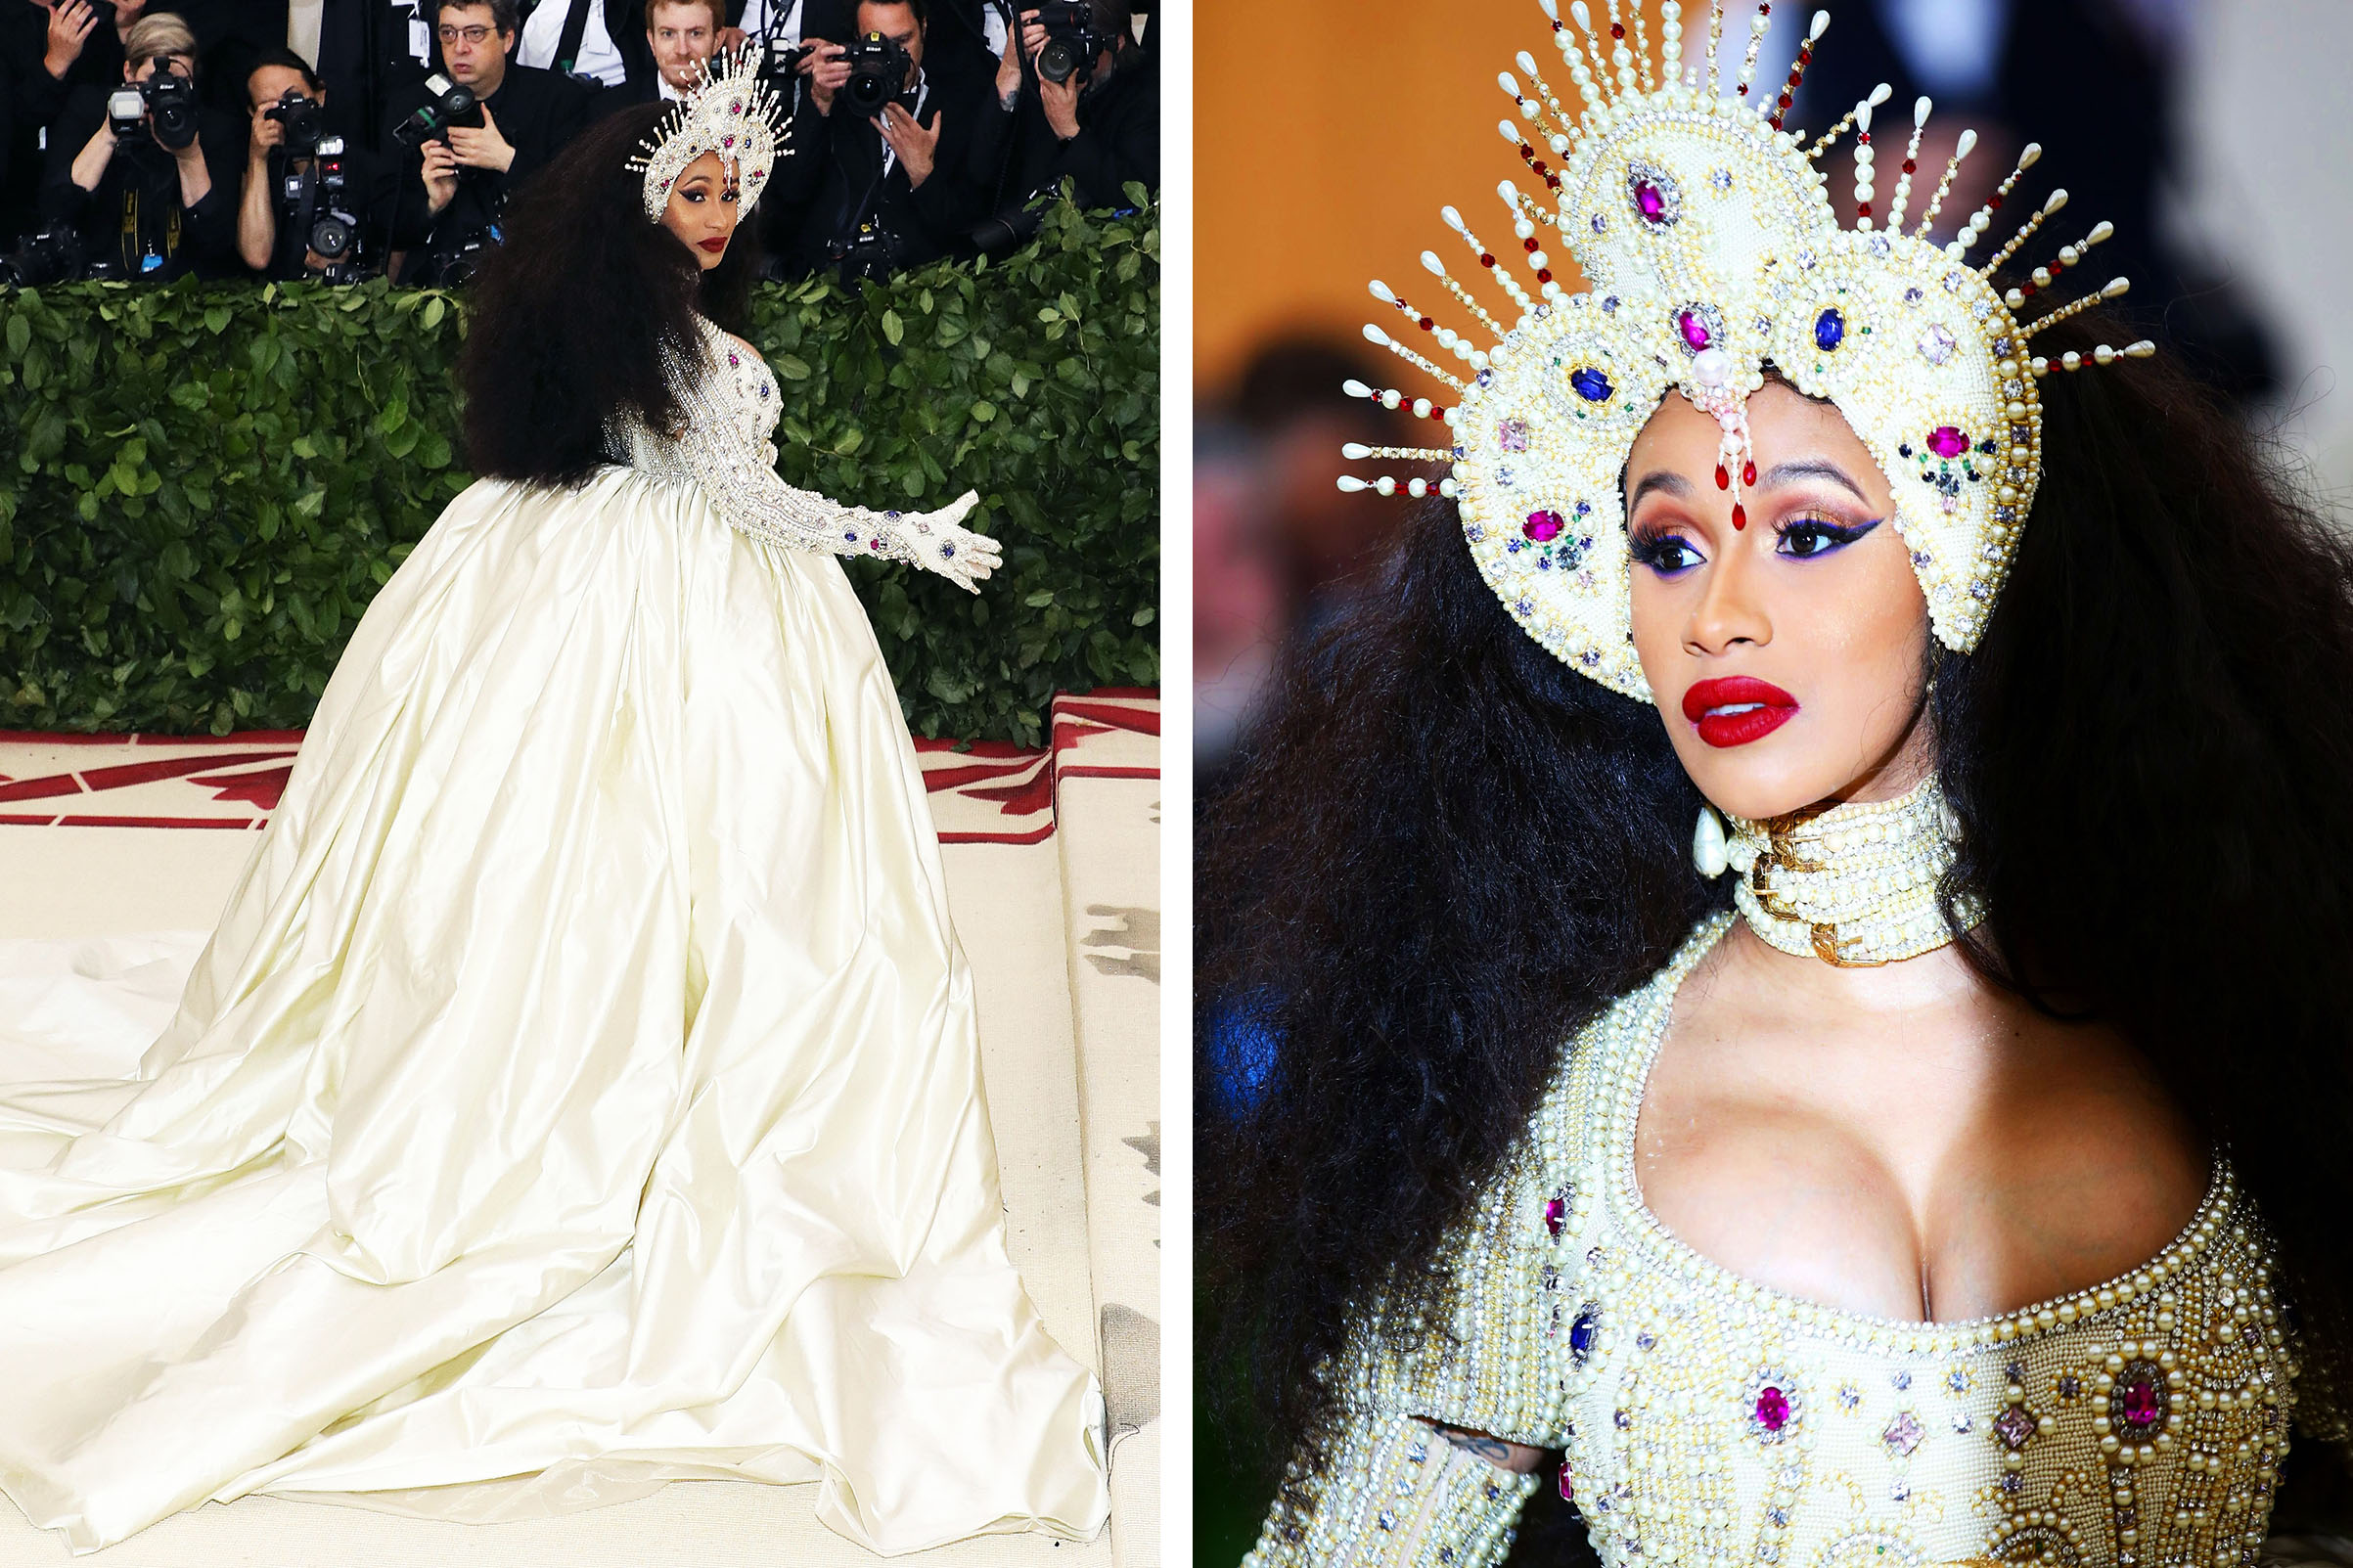 Cardi B attends the 2018 Met Gala. (Getty Images; BFA/Shutterstock)